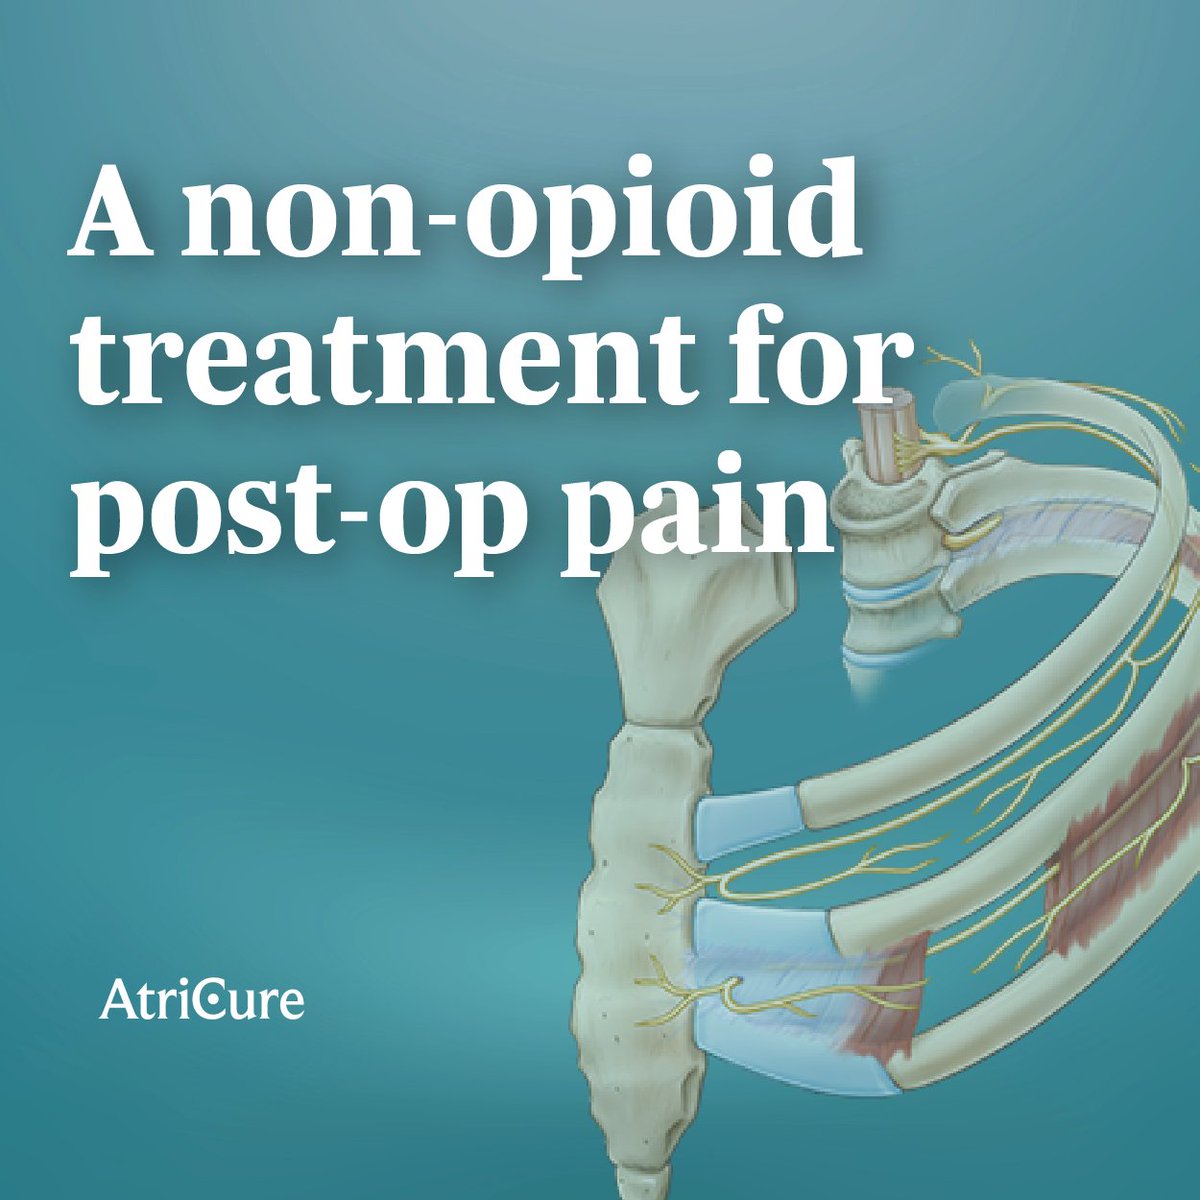 Cryo Nerve Block provides non-opioid pain relief, numbing the surgical site for up to 3 months. 

cryoNB is a crucial addition to pain-management care as options can become limited post-op. 

Learn more about #cryoNB: okt.to/5NXuSR 
#PatientsFirst #CardioTwitter